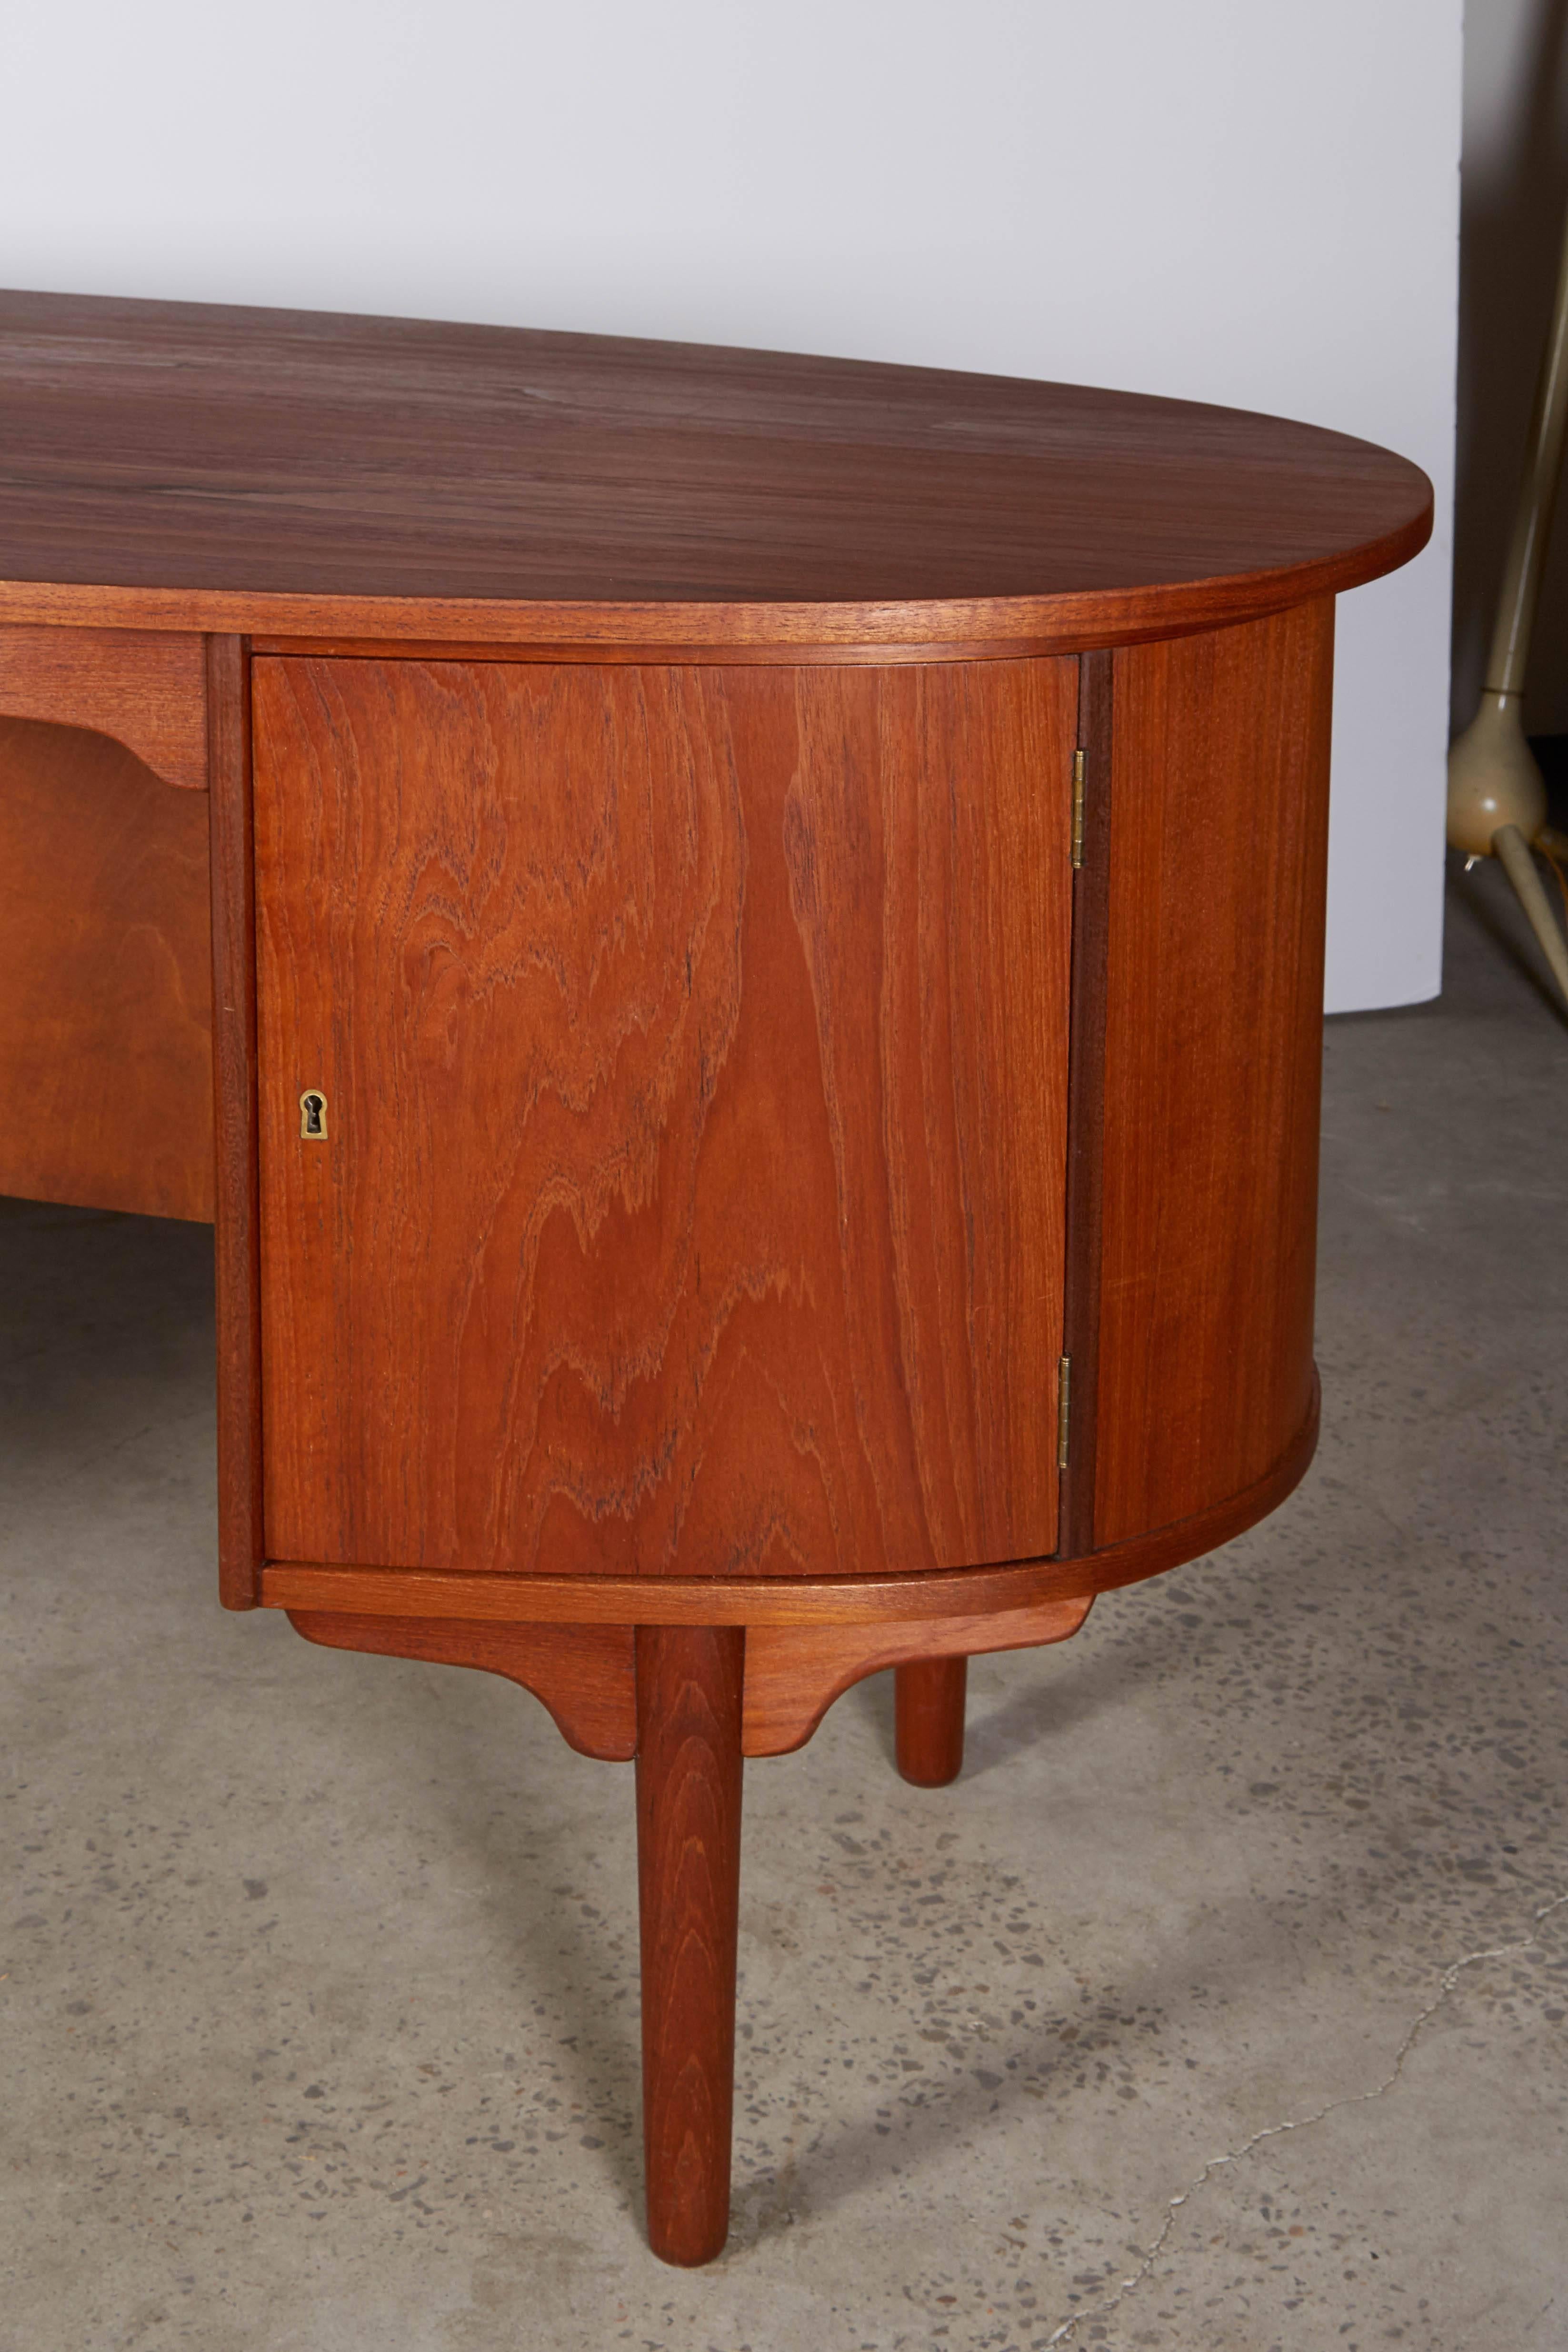 Vintage 1960s Danish Vintage Desk with Rounded End

This Danish Desk in in like new condition. The top of the desk is in the shape of a bullet. Simply looking at it's construction you can see that it's beautifully built to last!  In addition it's